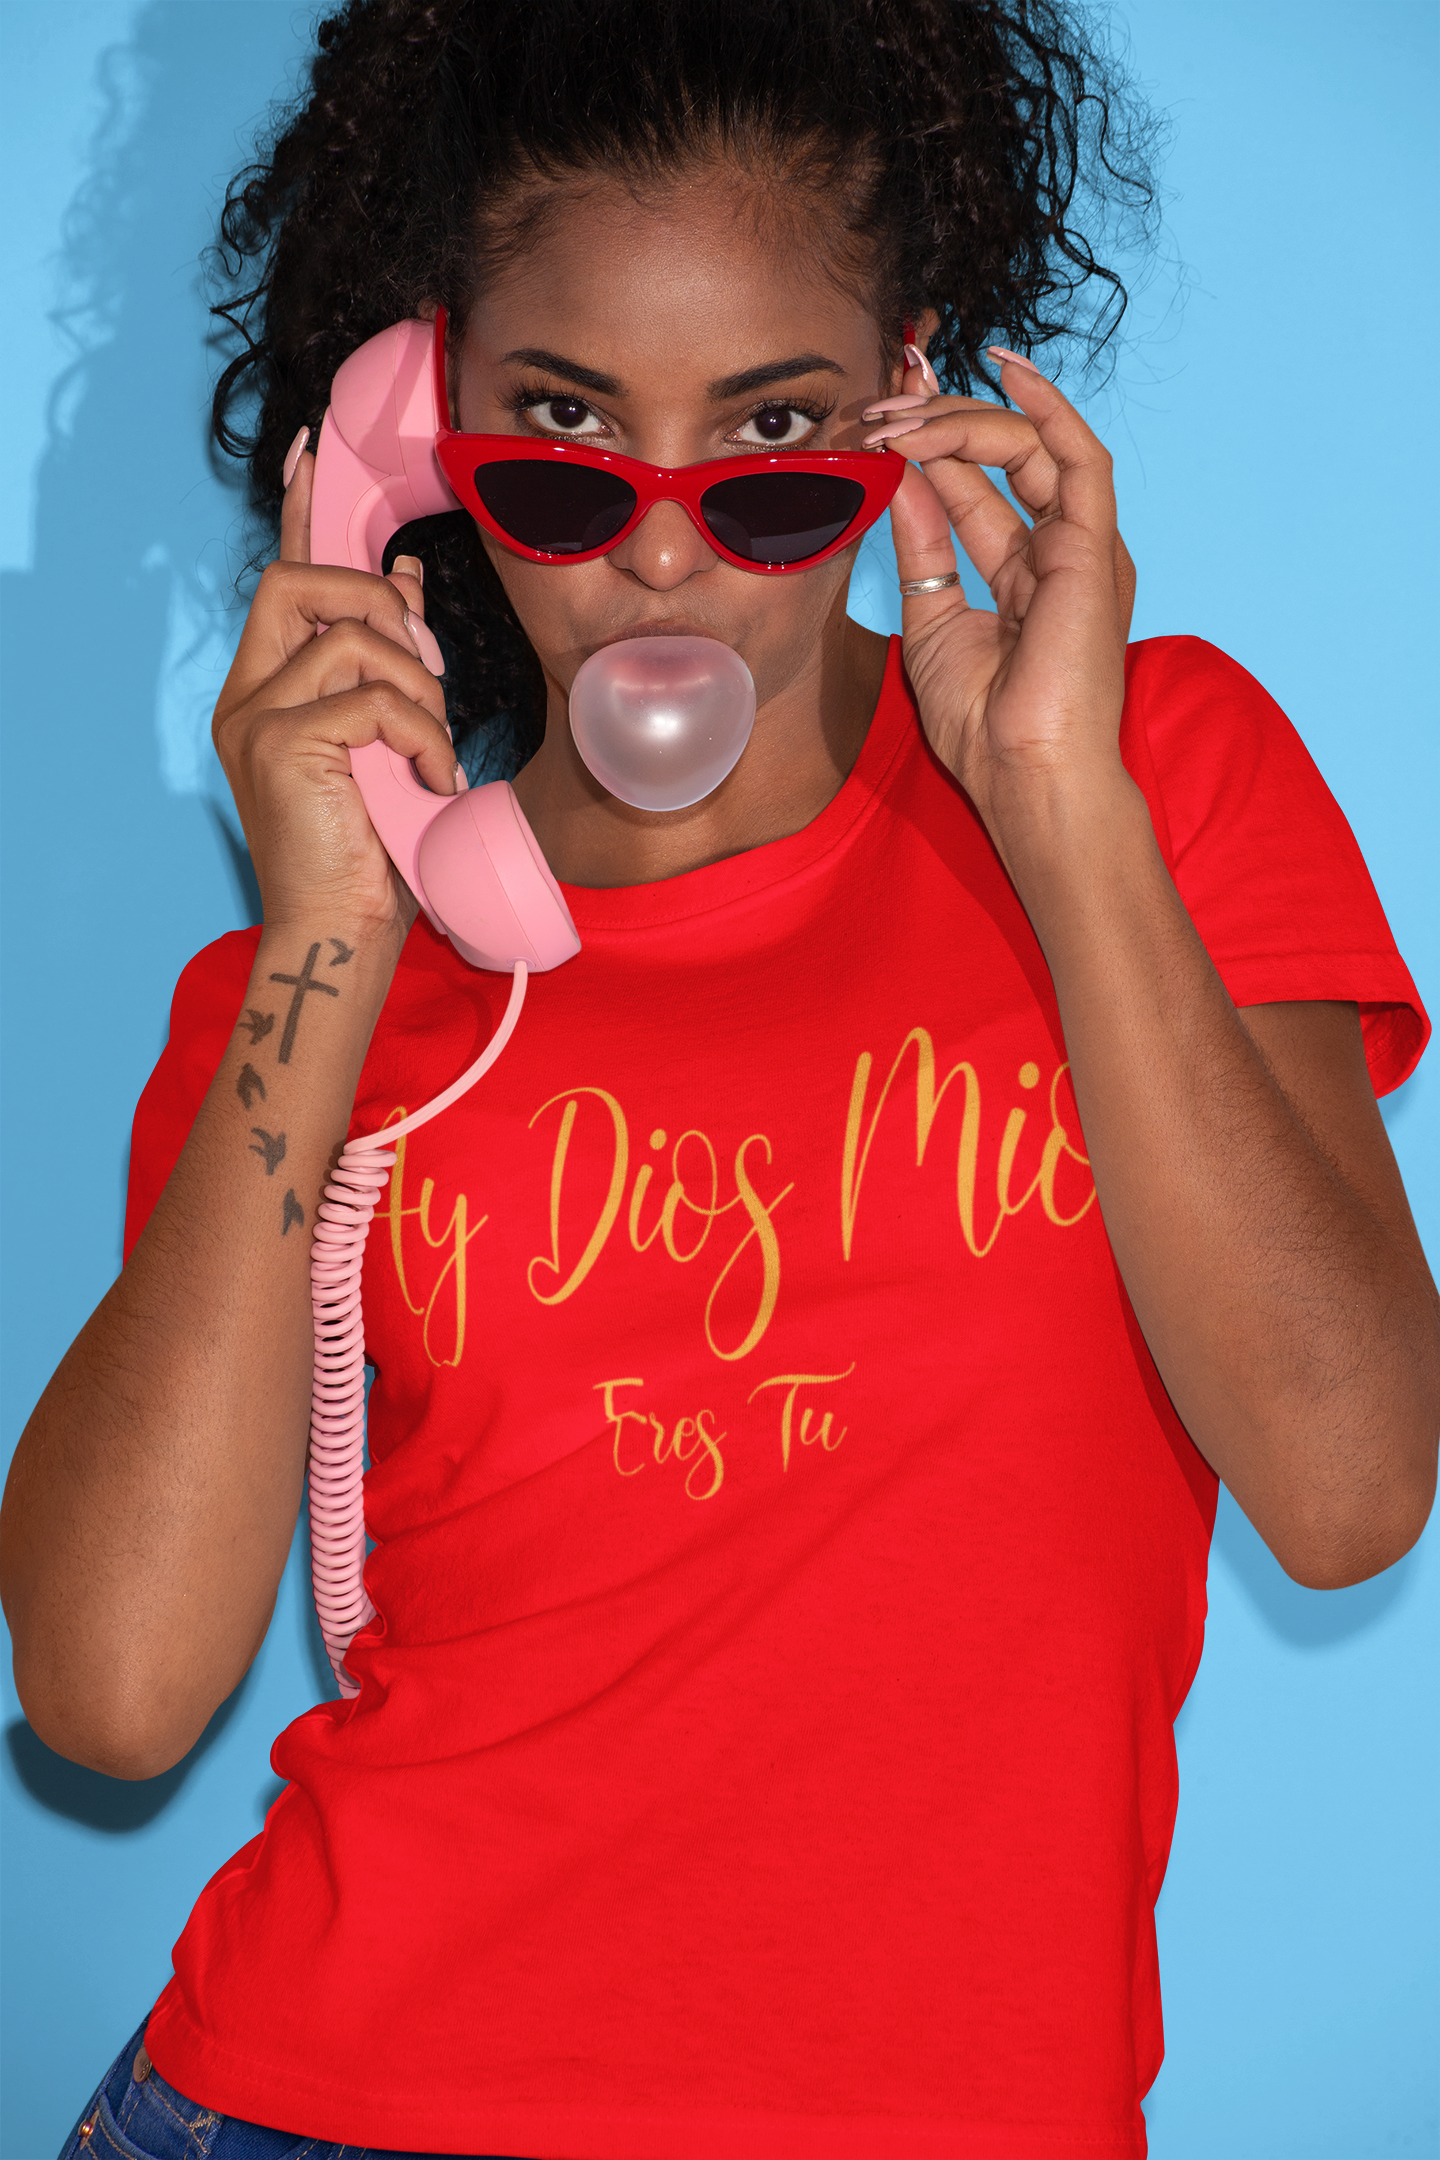 Ladies cut red tee with the text "Ay Dios Mio, Eres Tu" in gold yellow text written on it.